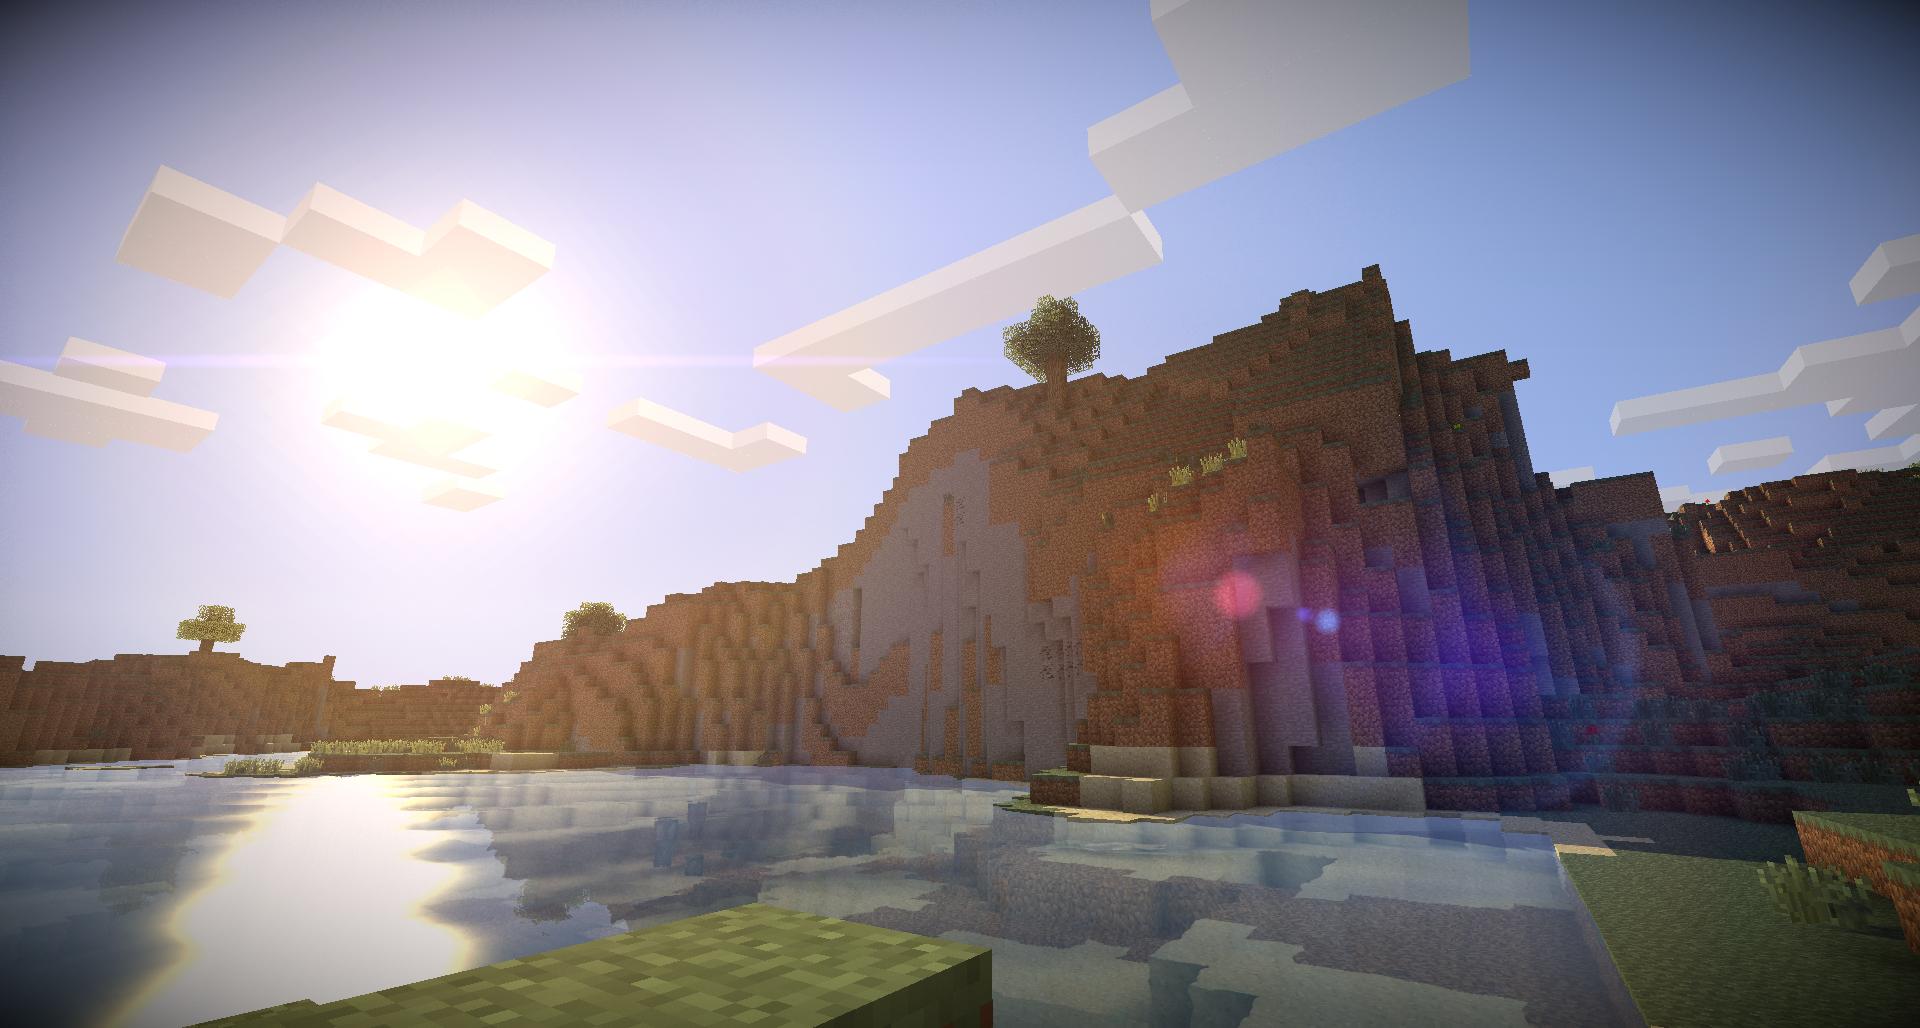 minecraft 1.12 shaders texture pack